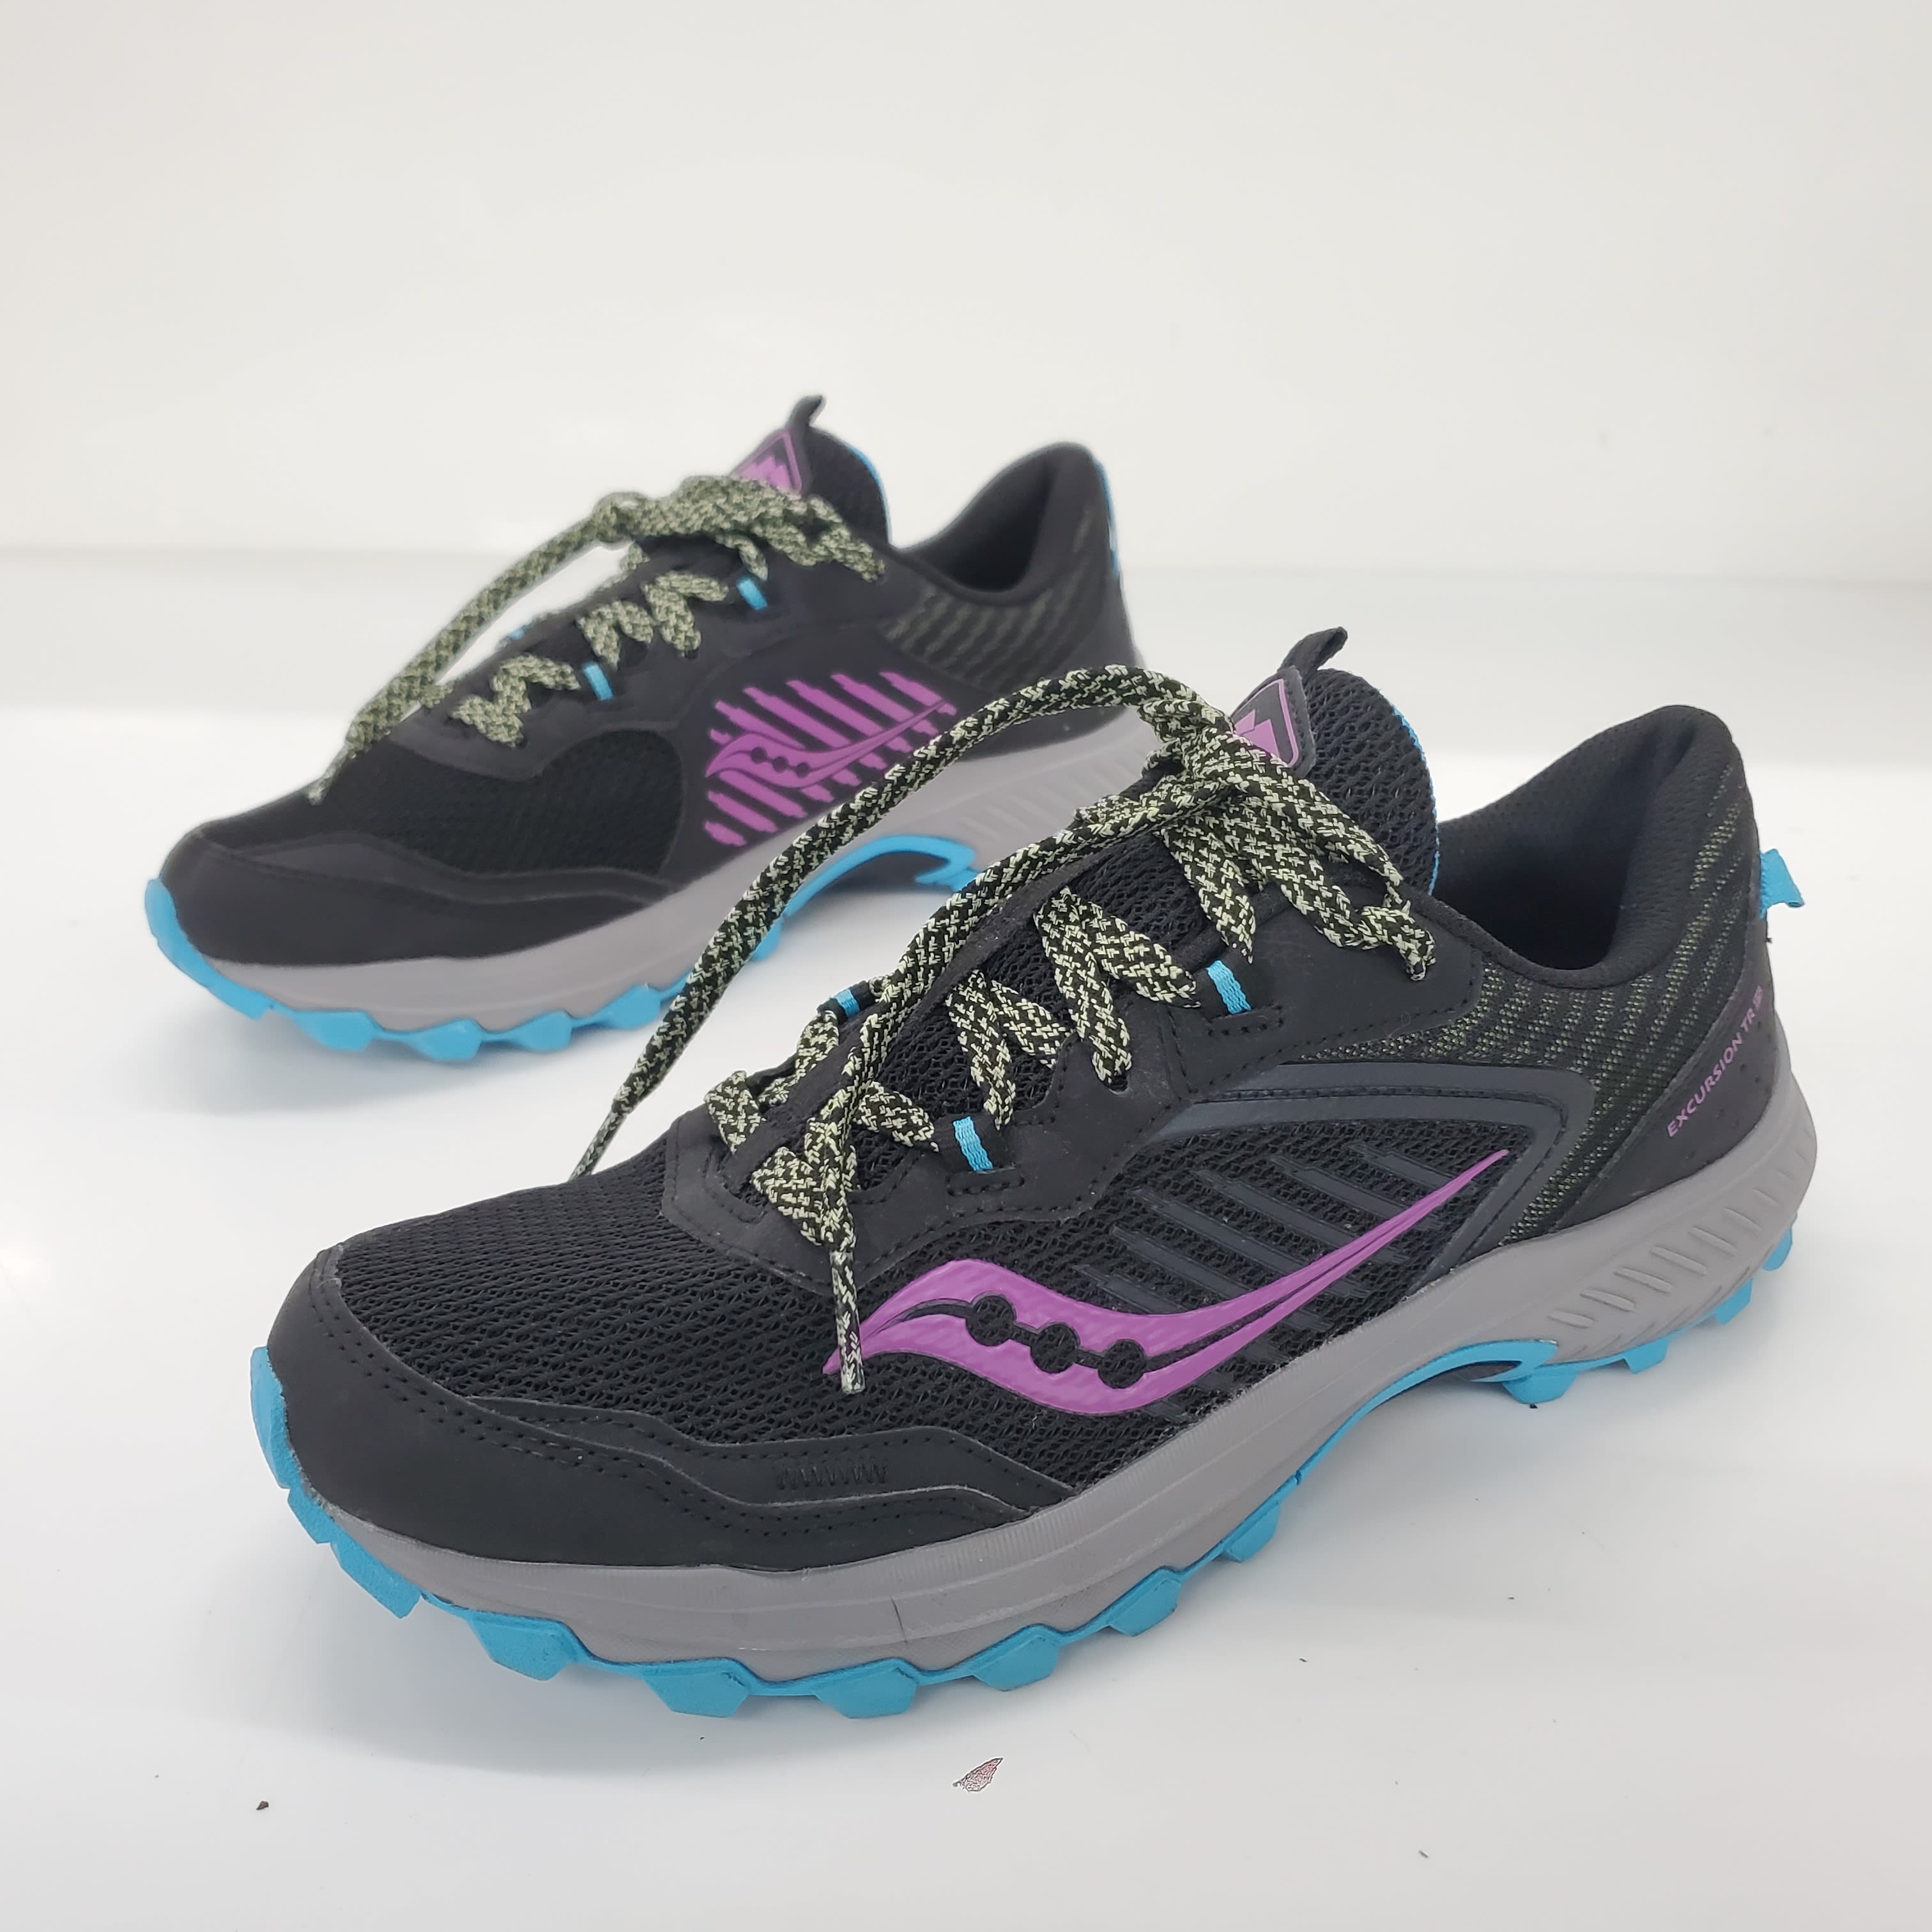 Buy the Saucony Women's Excursion TR15 Black Trail Running Shoes